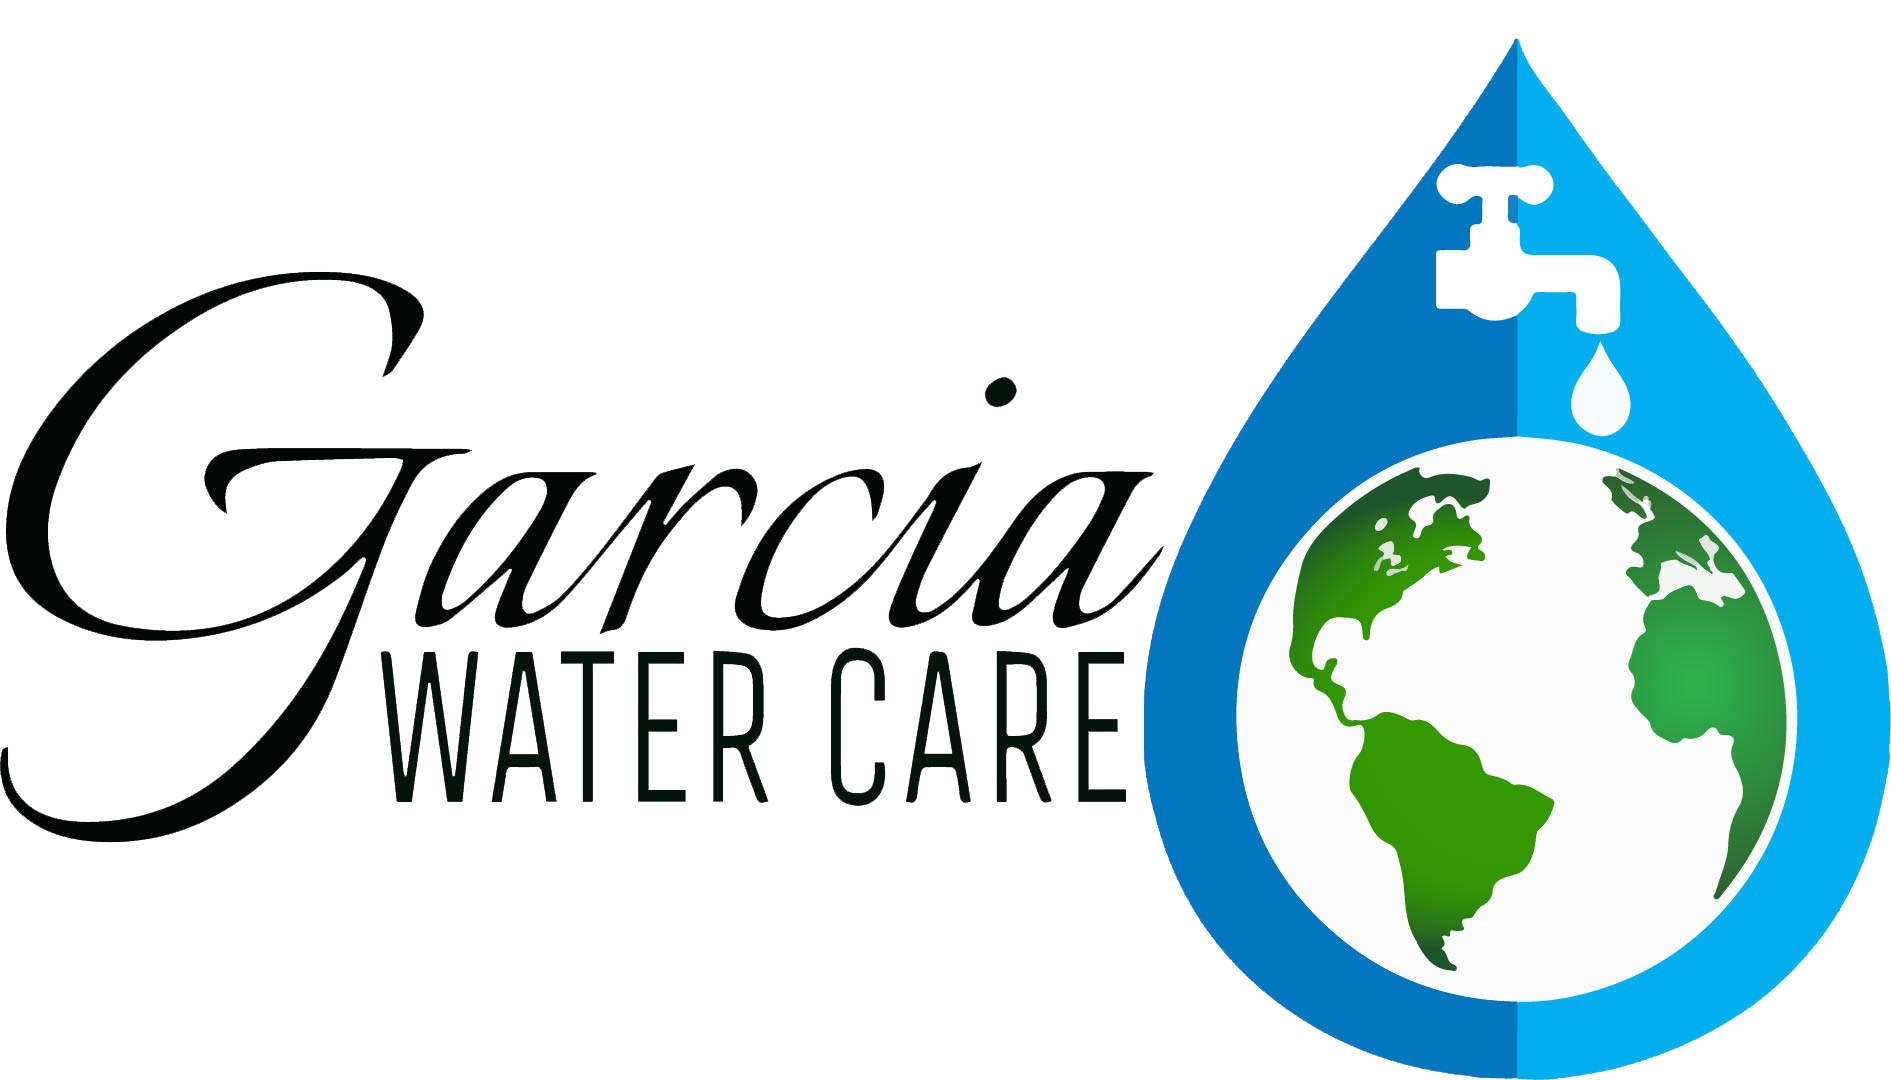 Garcia Water Care is a Puronics authorized dealer ship that offer maintenance and service of all reverse osmosis and water softeners.